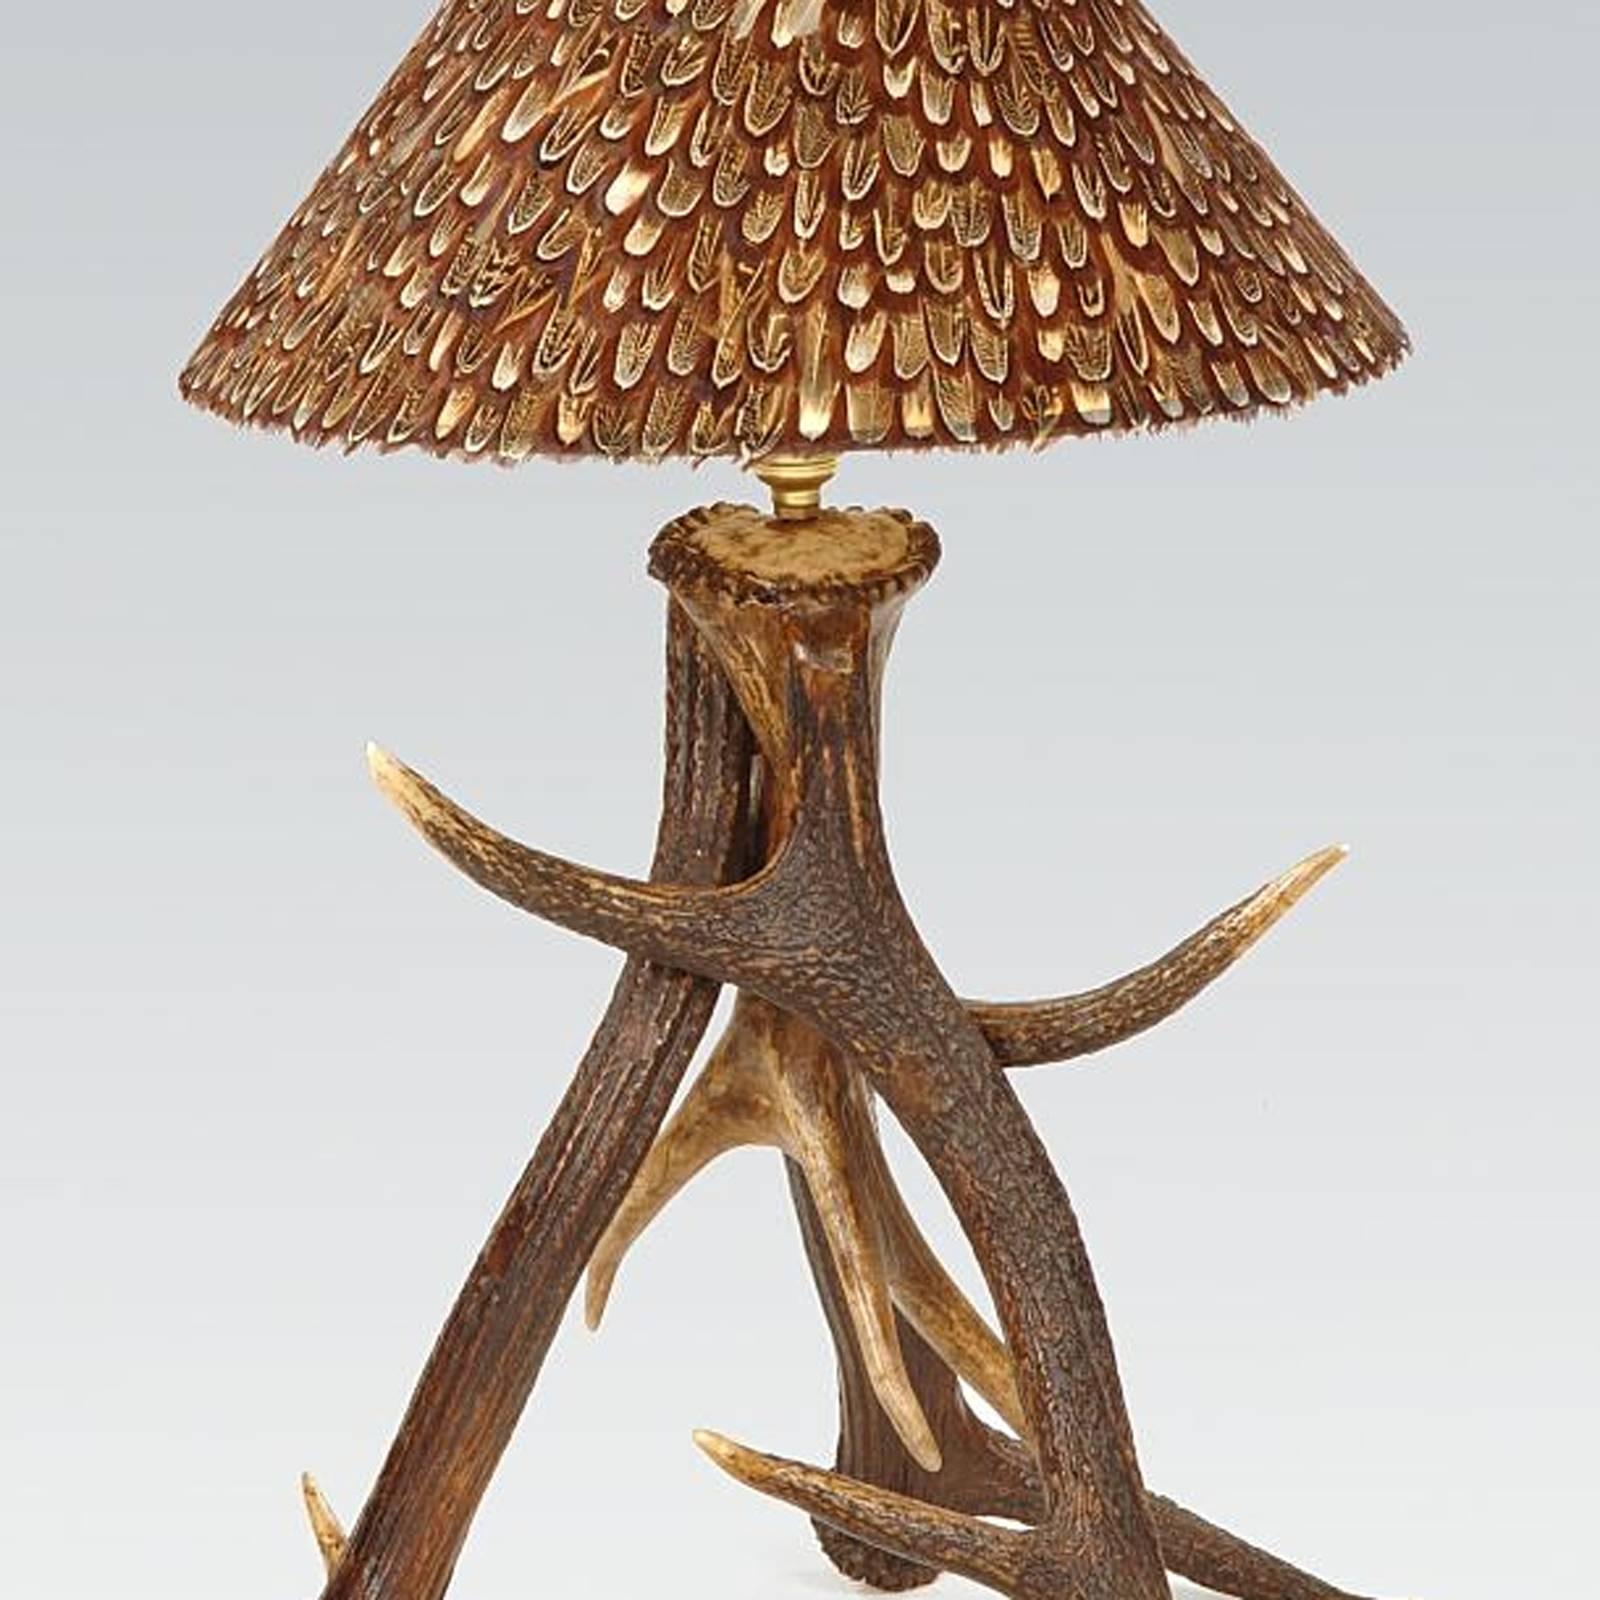 Scottish Three Antlers Table Lamp with Partridge Feather Lamp Shade